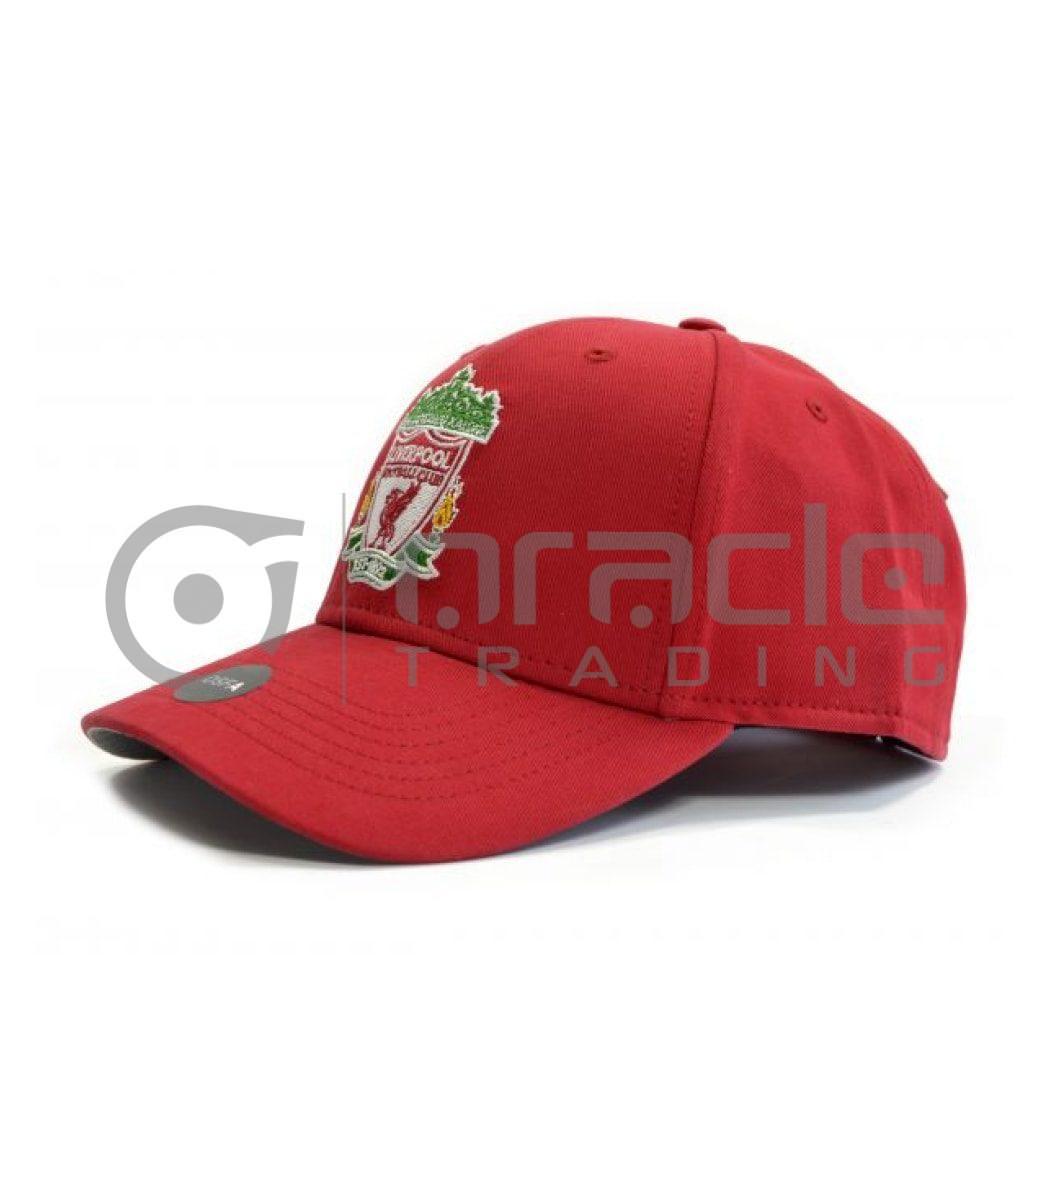 Liverpool Red Crest Hat - Classic - Brand 47